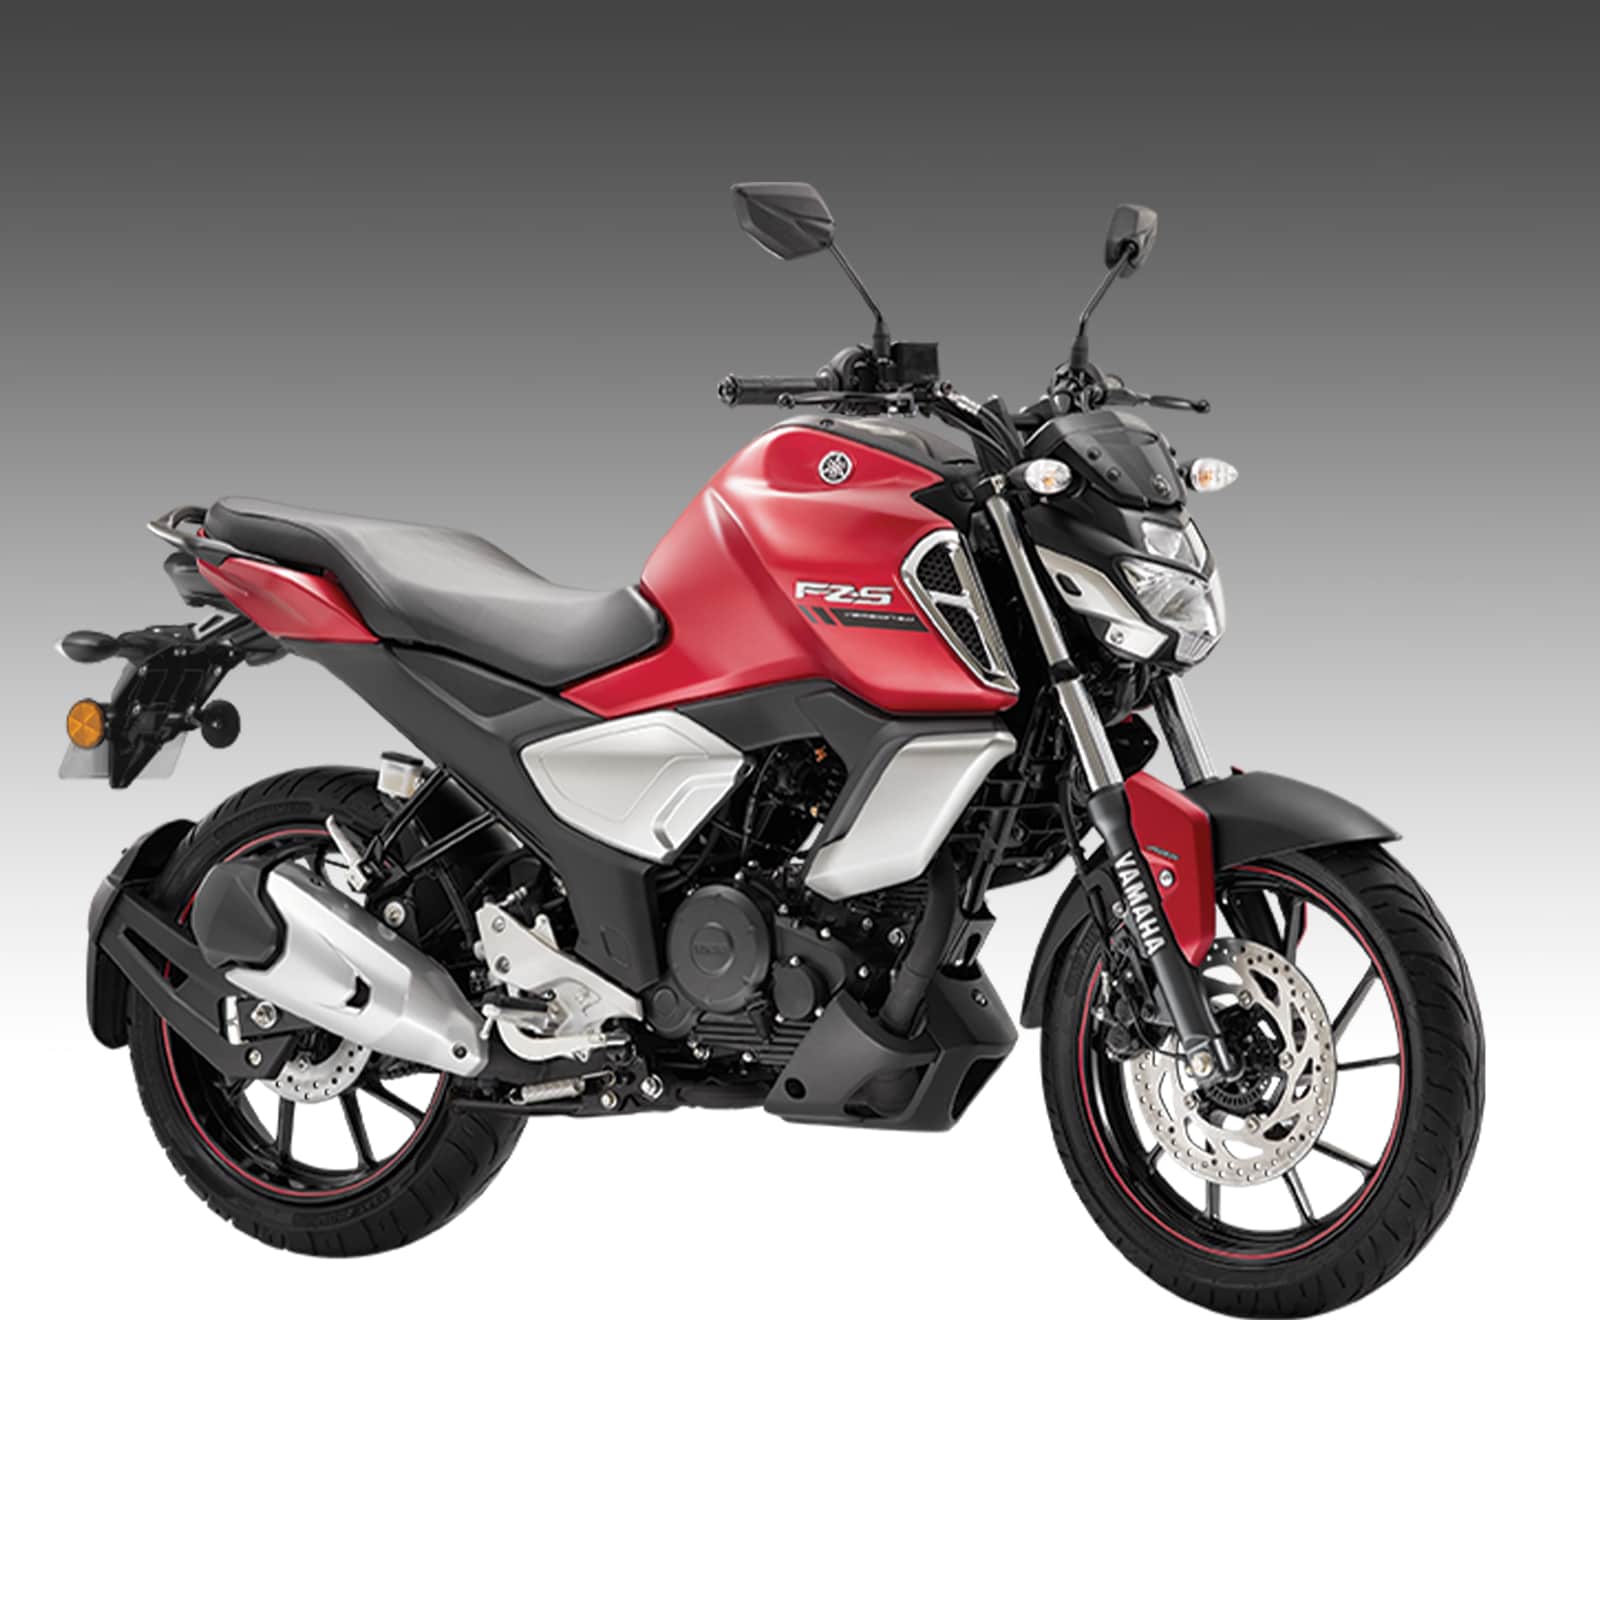 Yamaha Fz Price Specs Review Pics Mileage In India Atelier Yuwa Ciao Jp